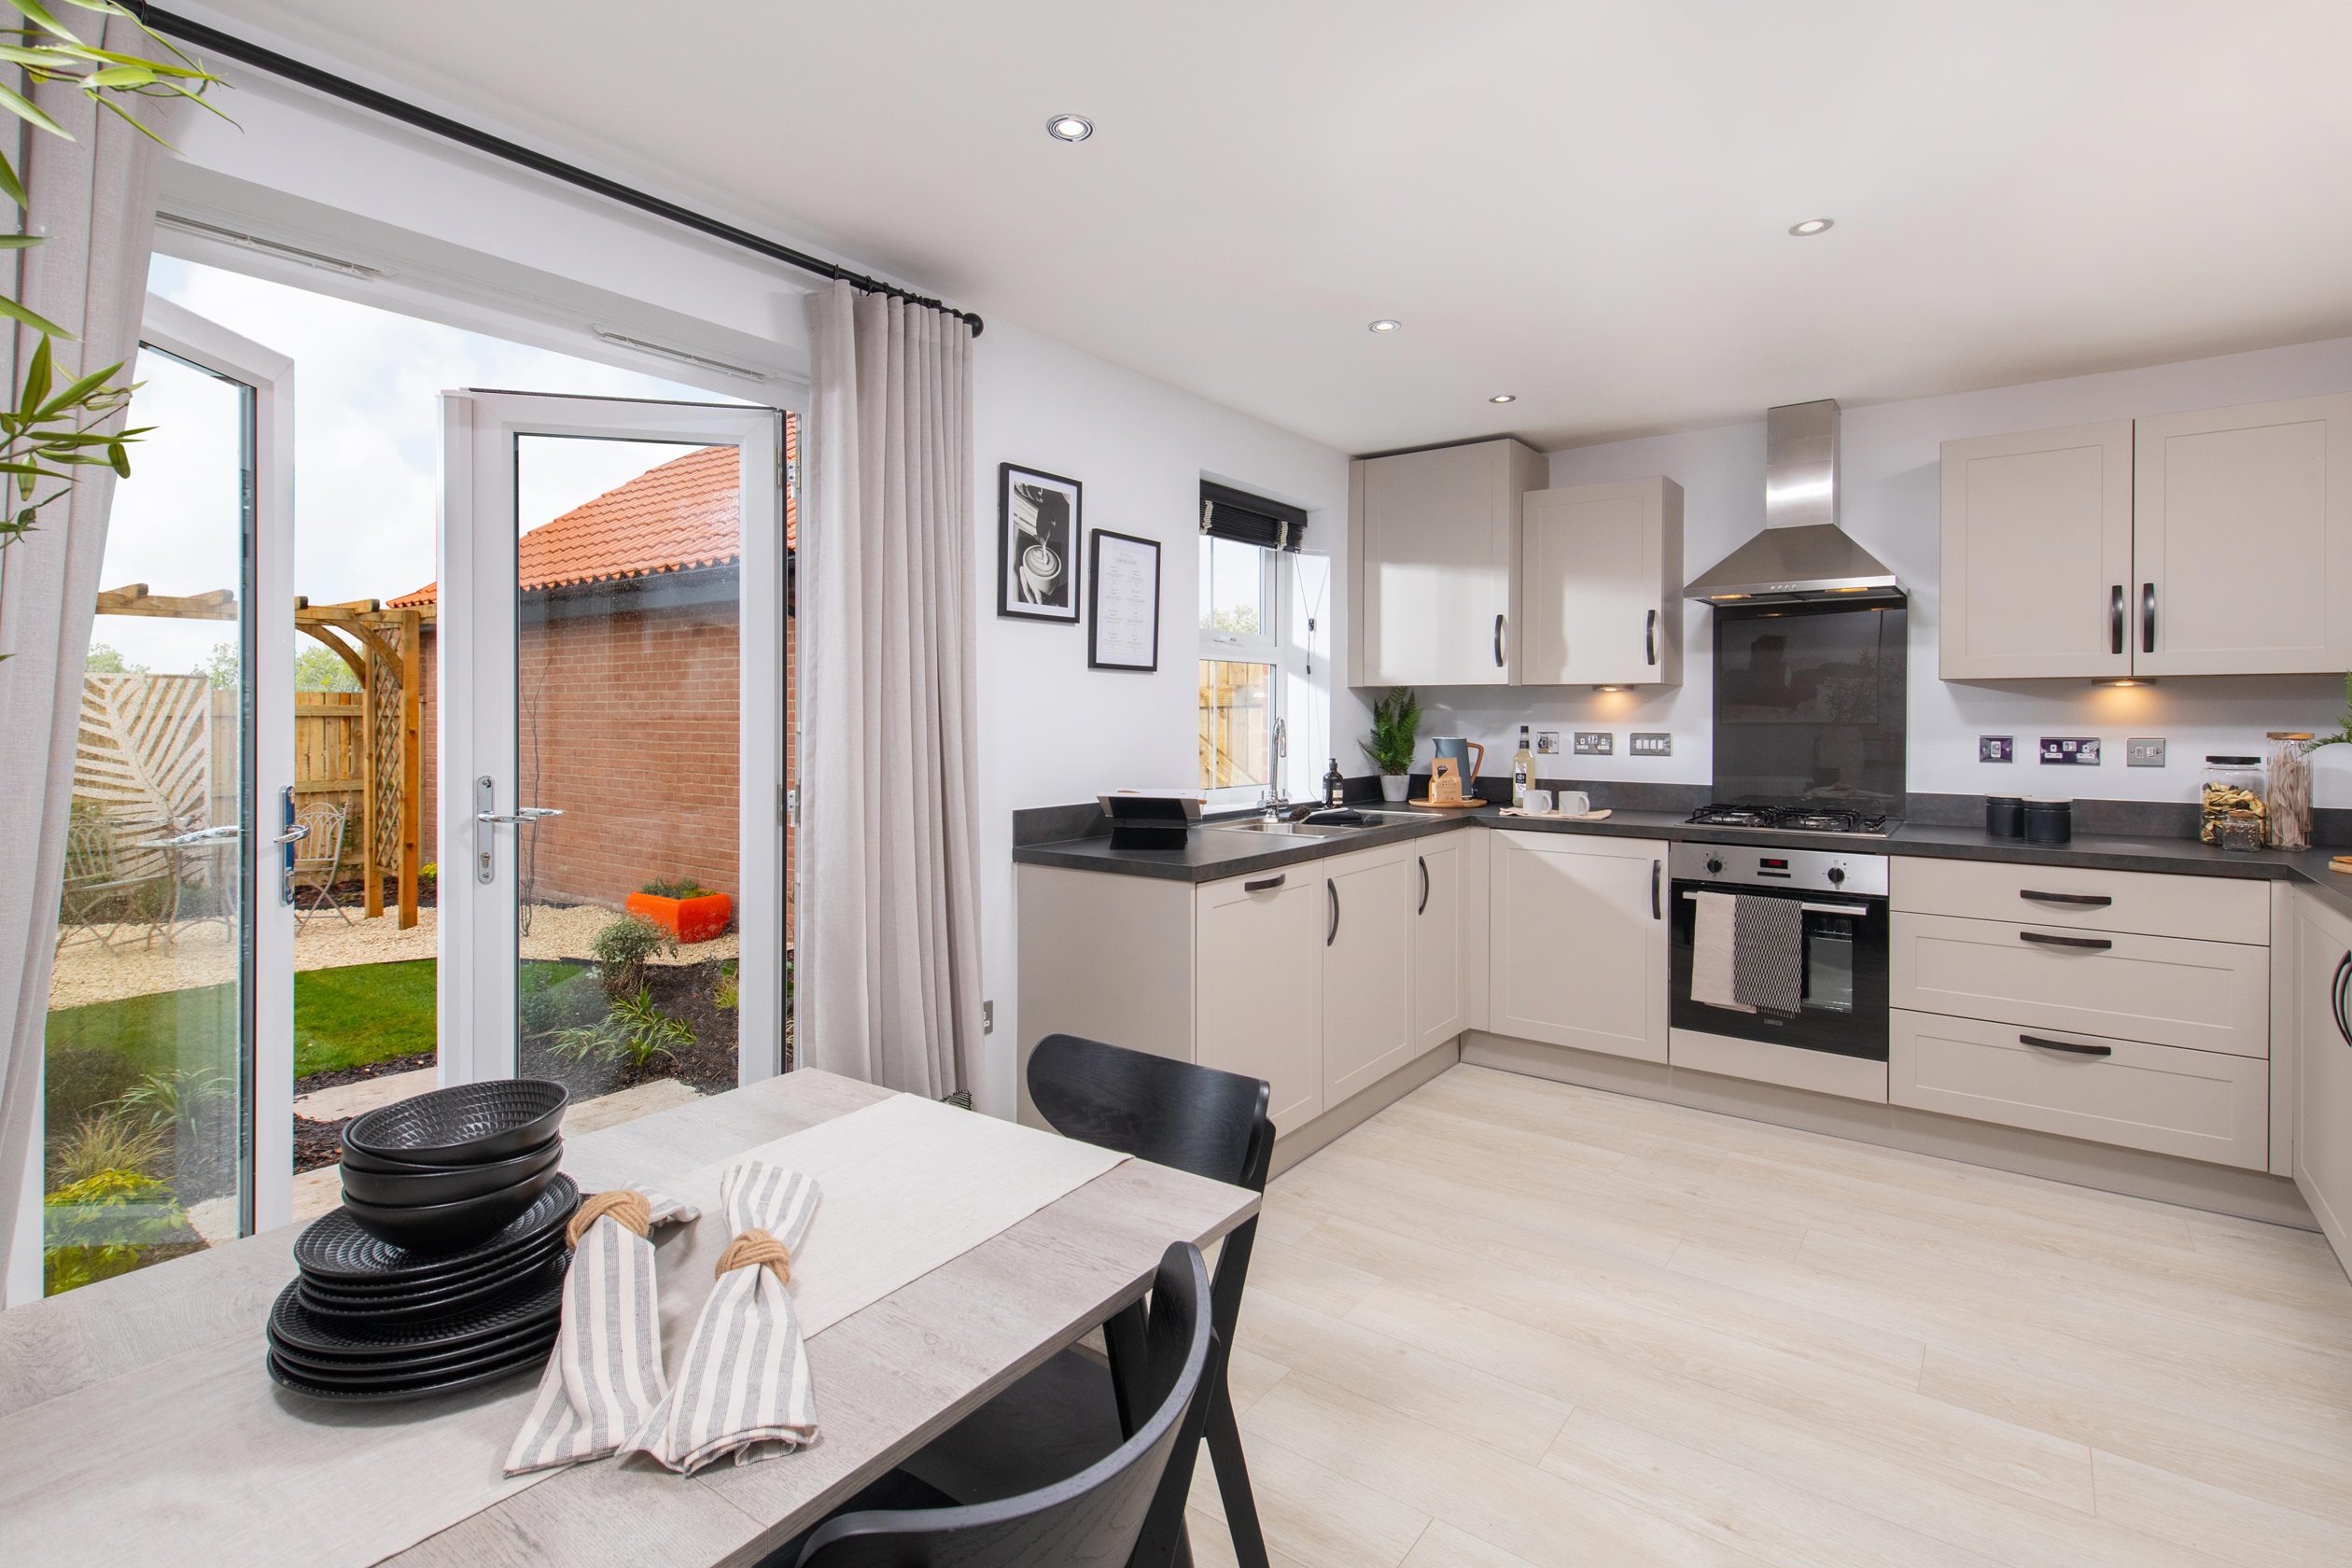 Property 1 of 10. The Archford Show Home